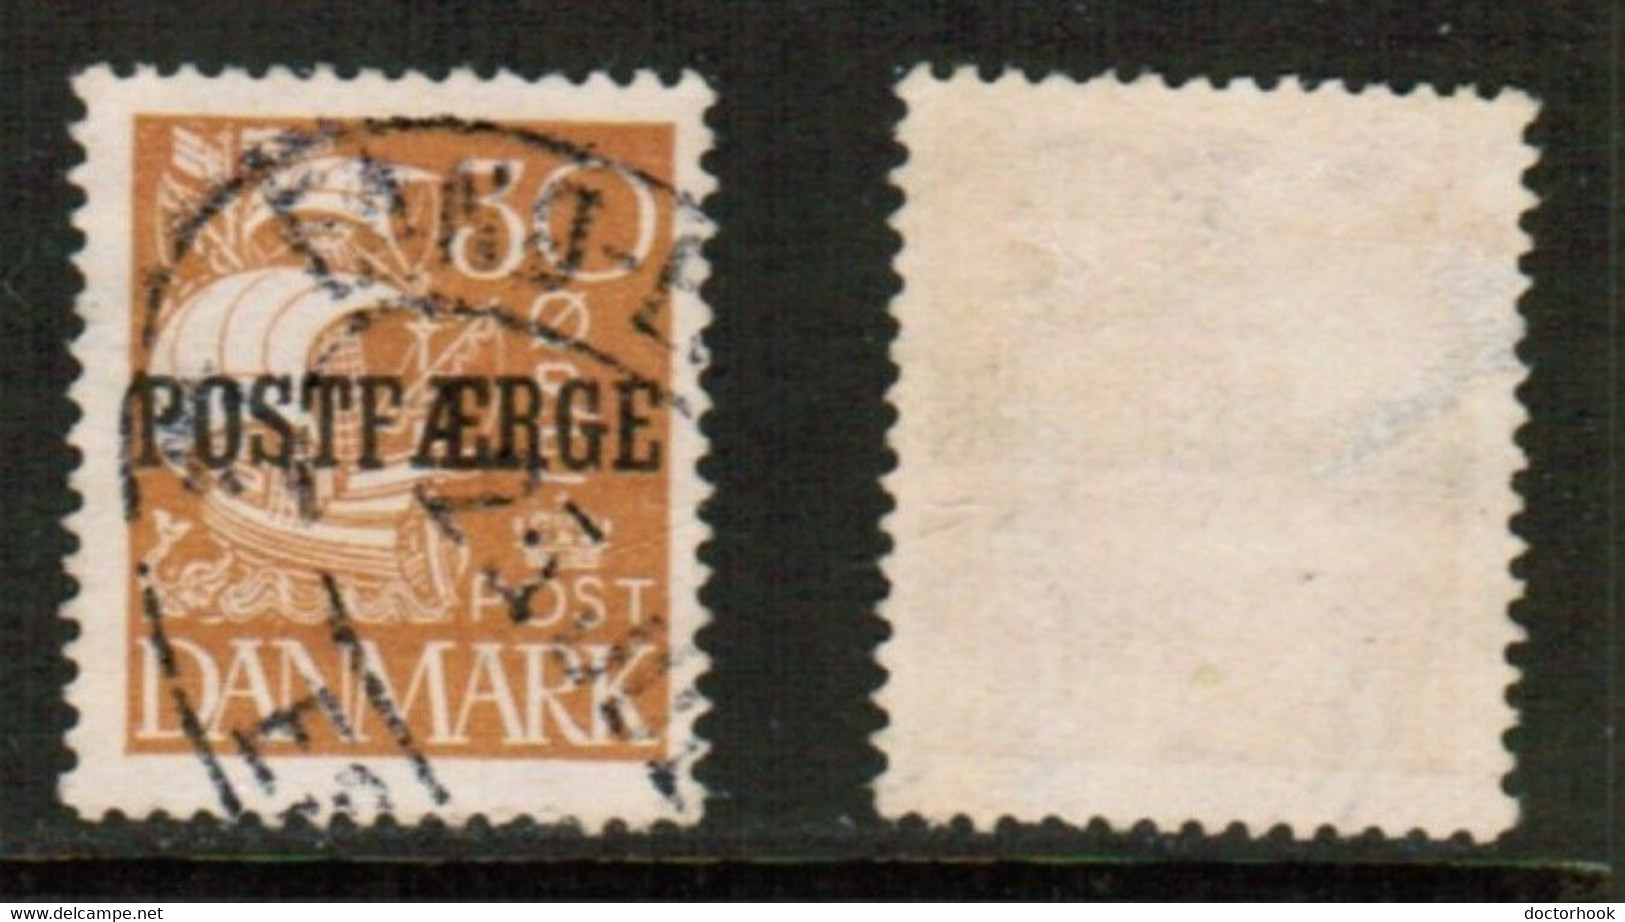 DENMARK   Scott # Q 13 USED (CONDITION AS PER SCAN) (Stamp Scan # 864-10) - Pacchi Postali